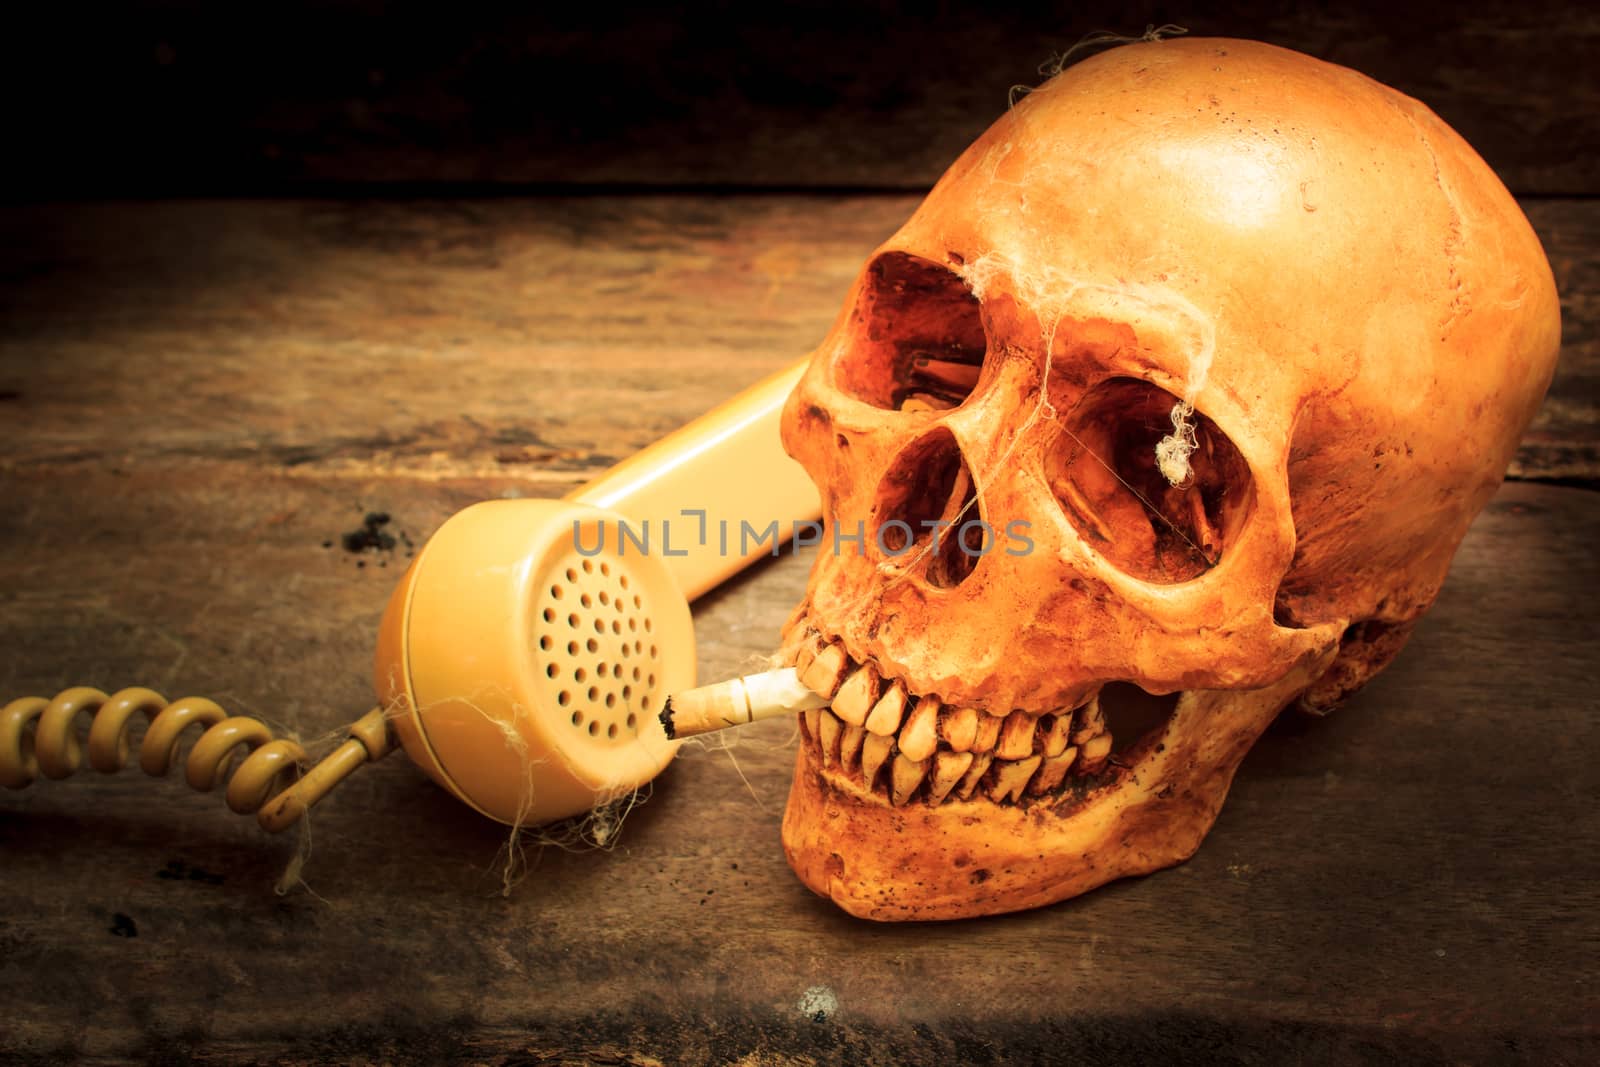 Skull with cigarette, and old wood background.